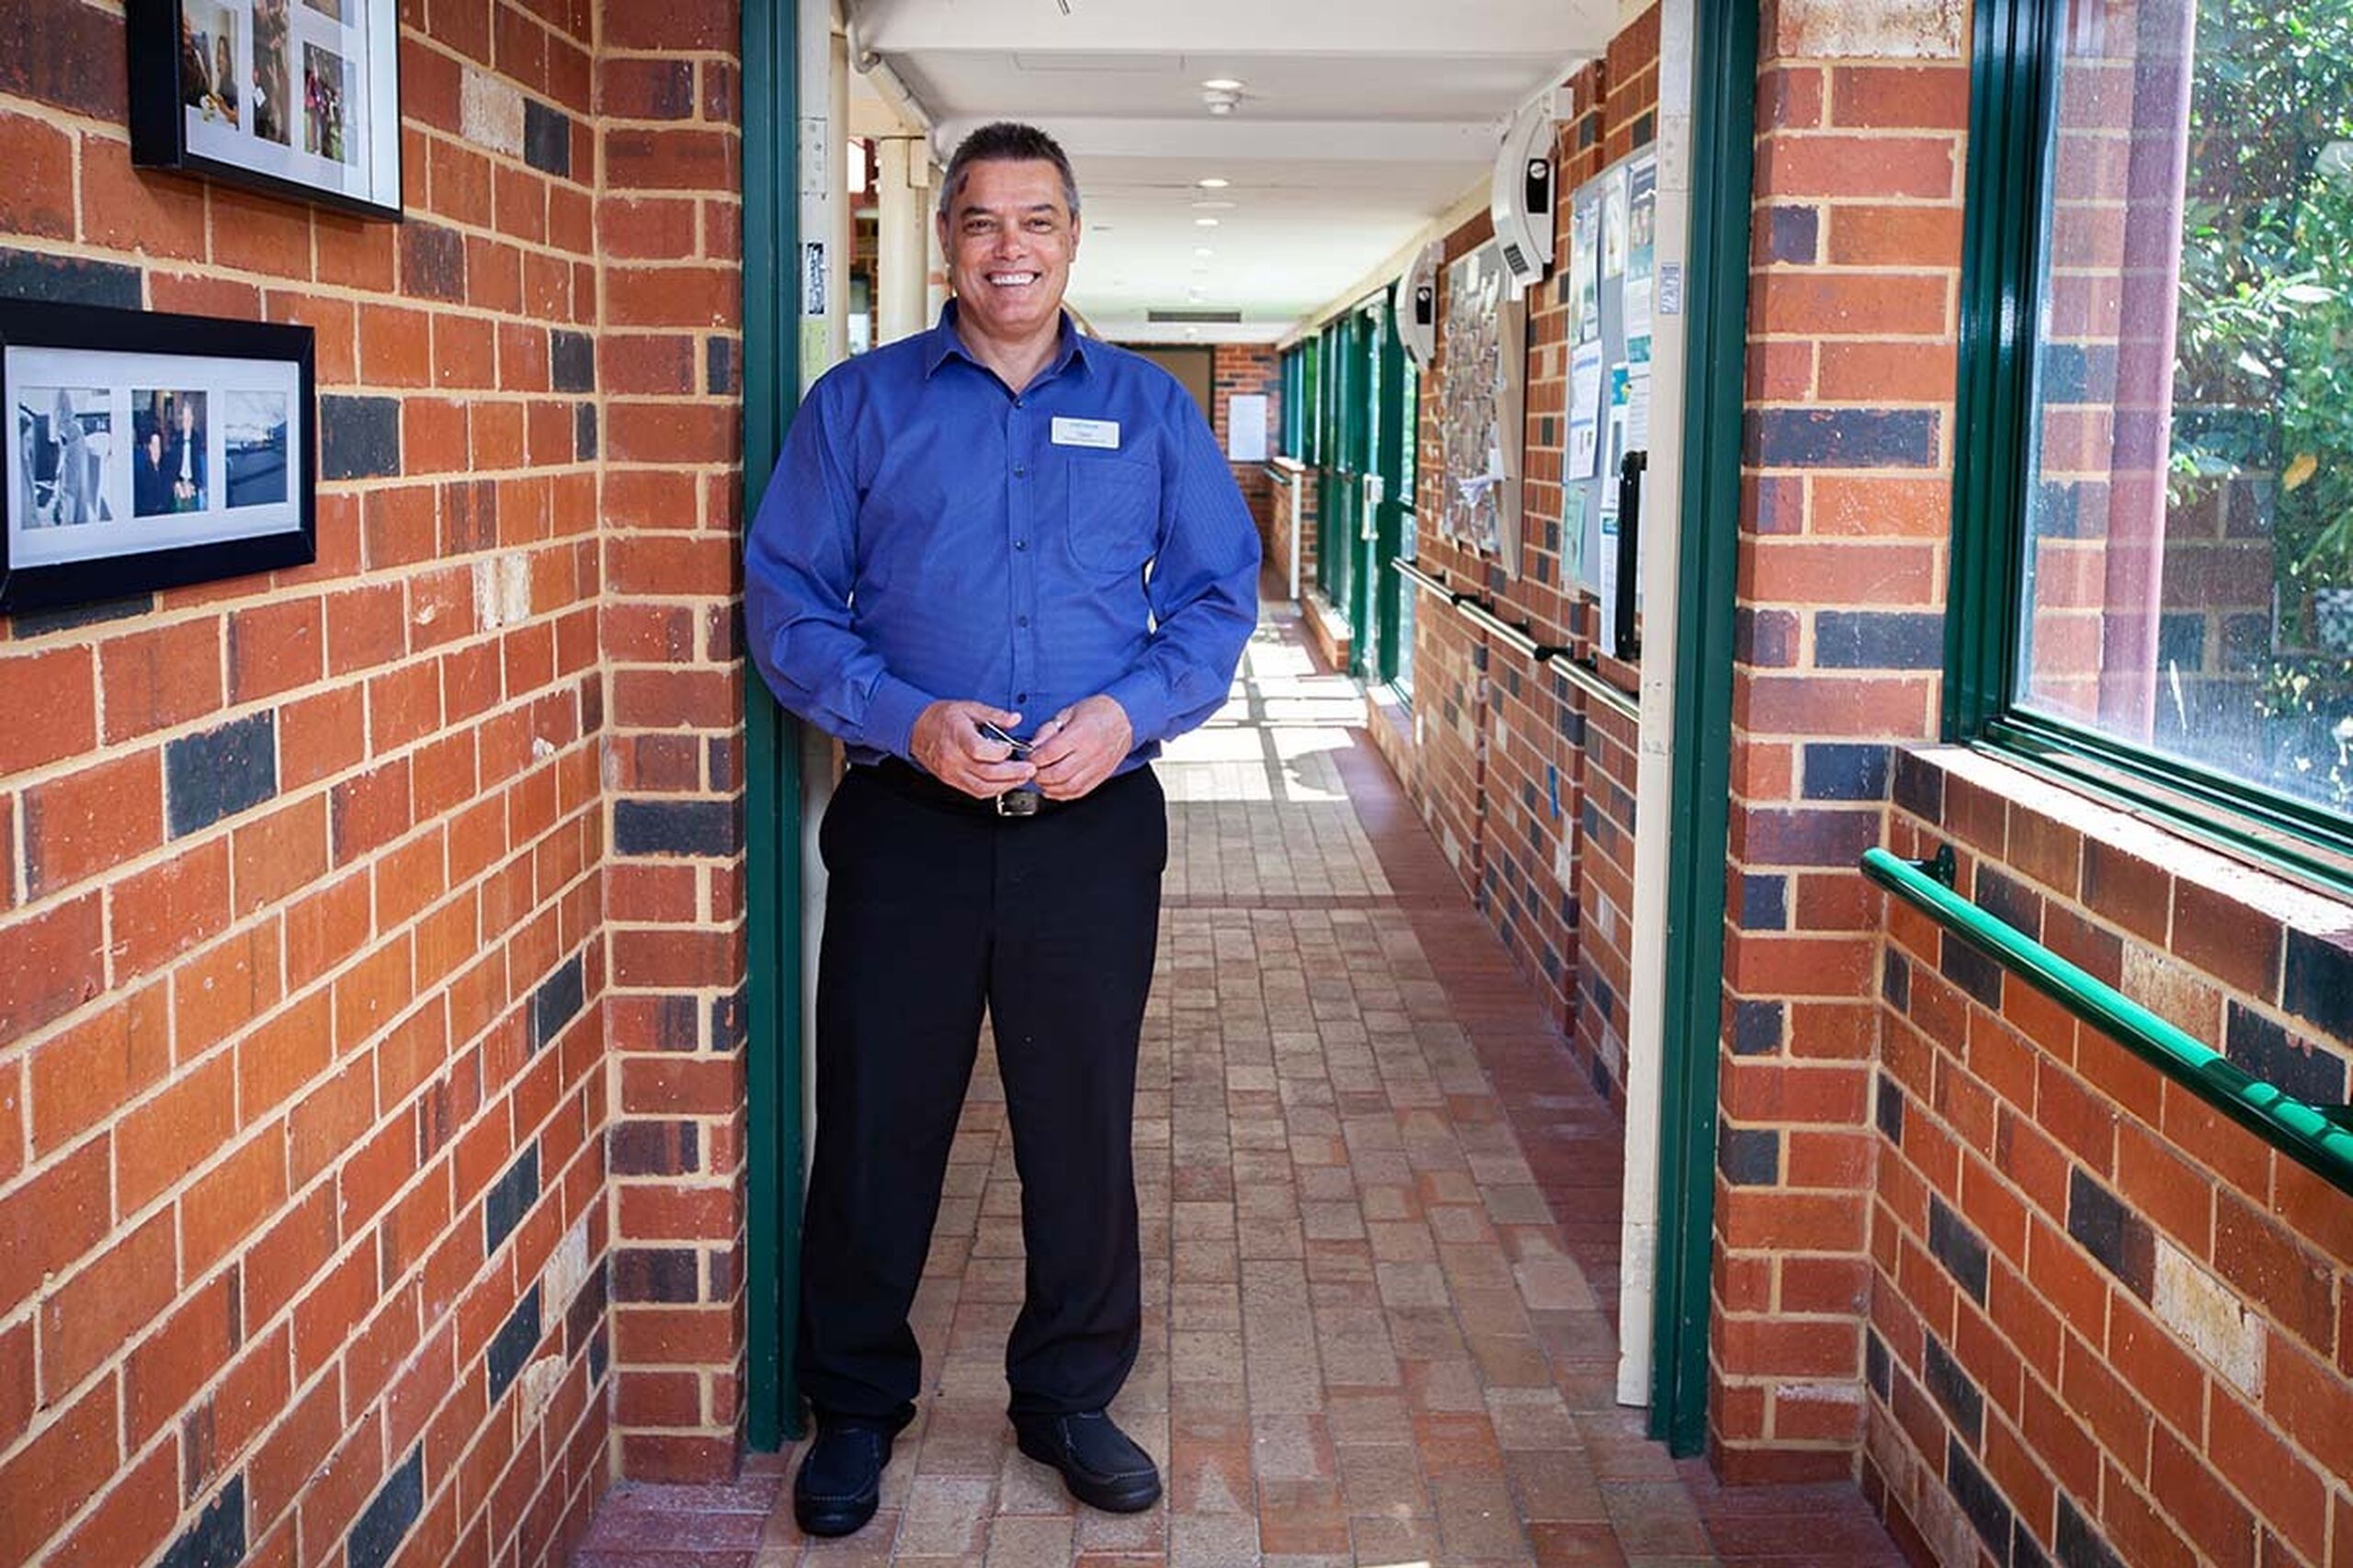 Former FIFO worker returns to career in aged care